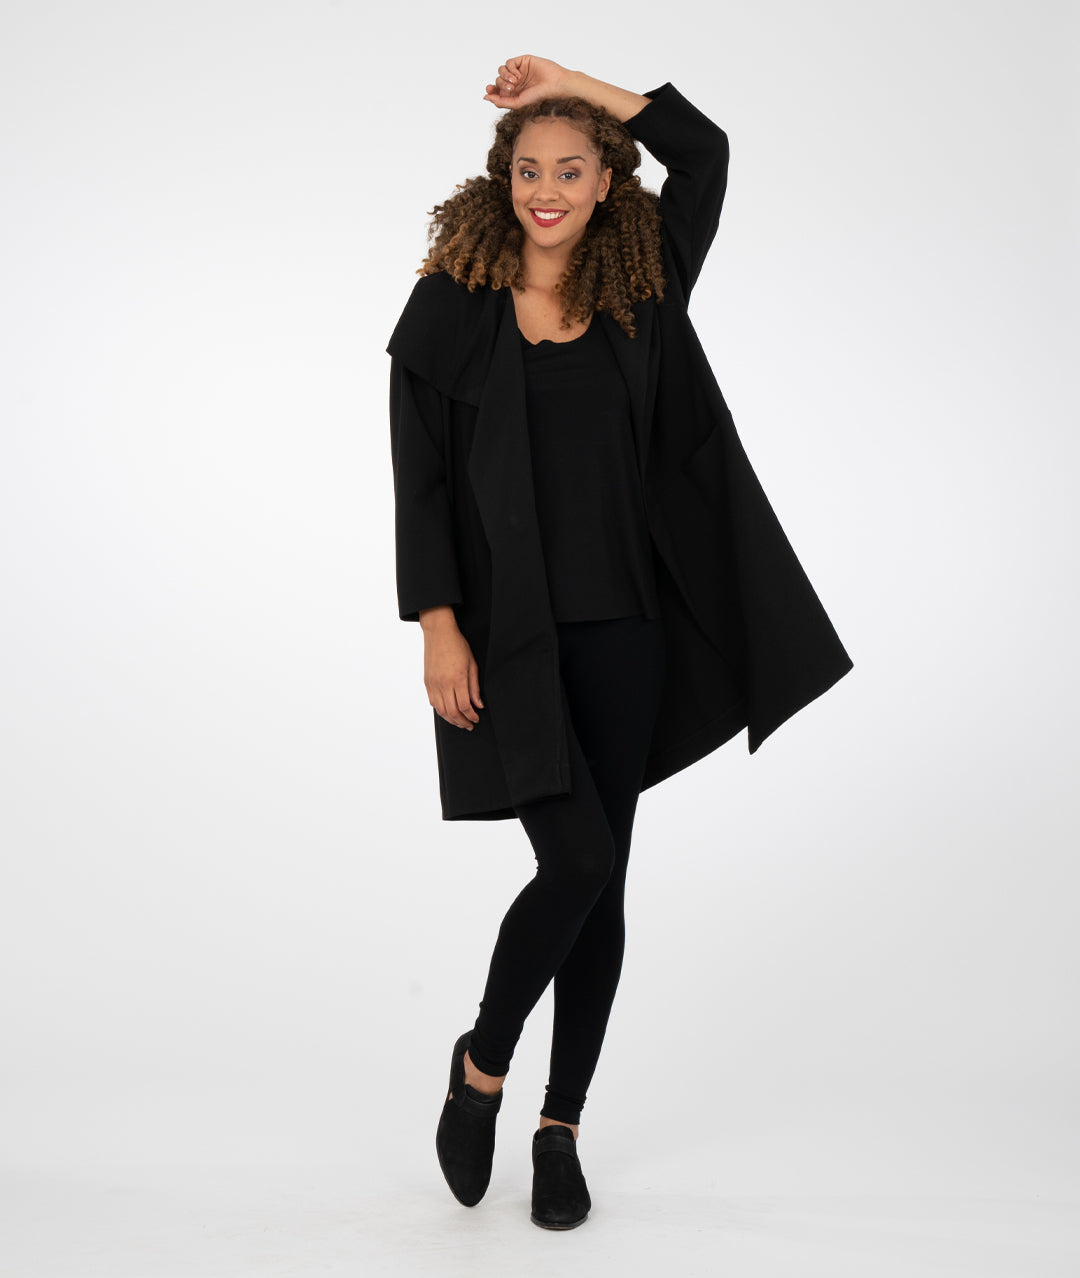 model in black leggings with a black asymmetrical jacket with a large collar